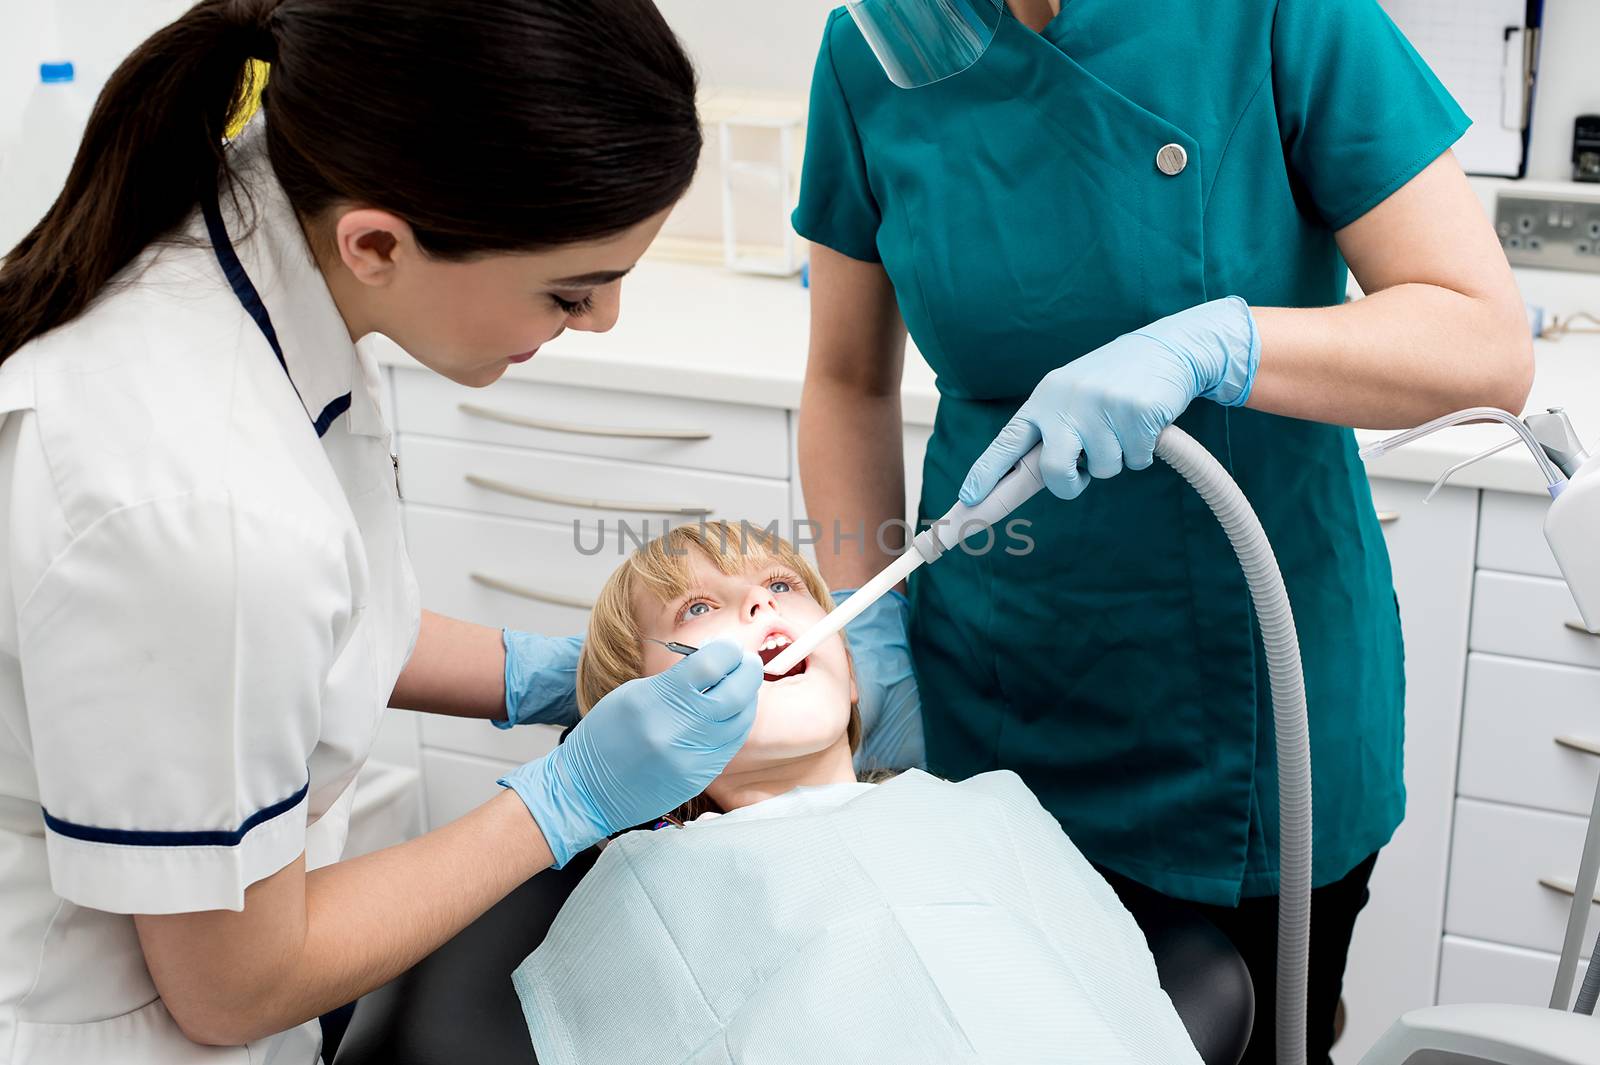 Dentist and assistant curing little girl